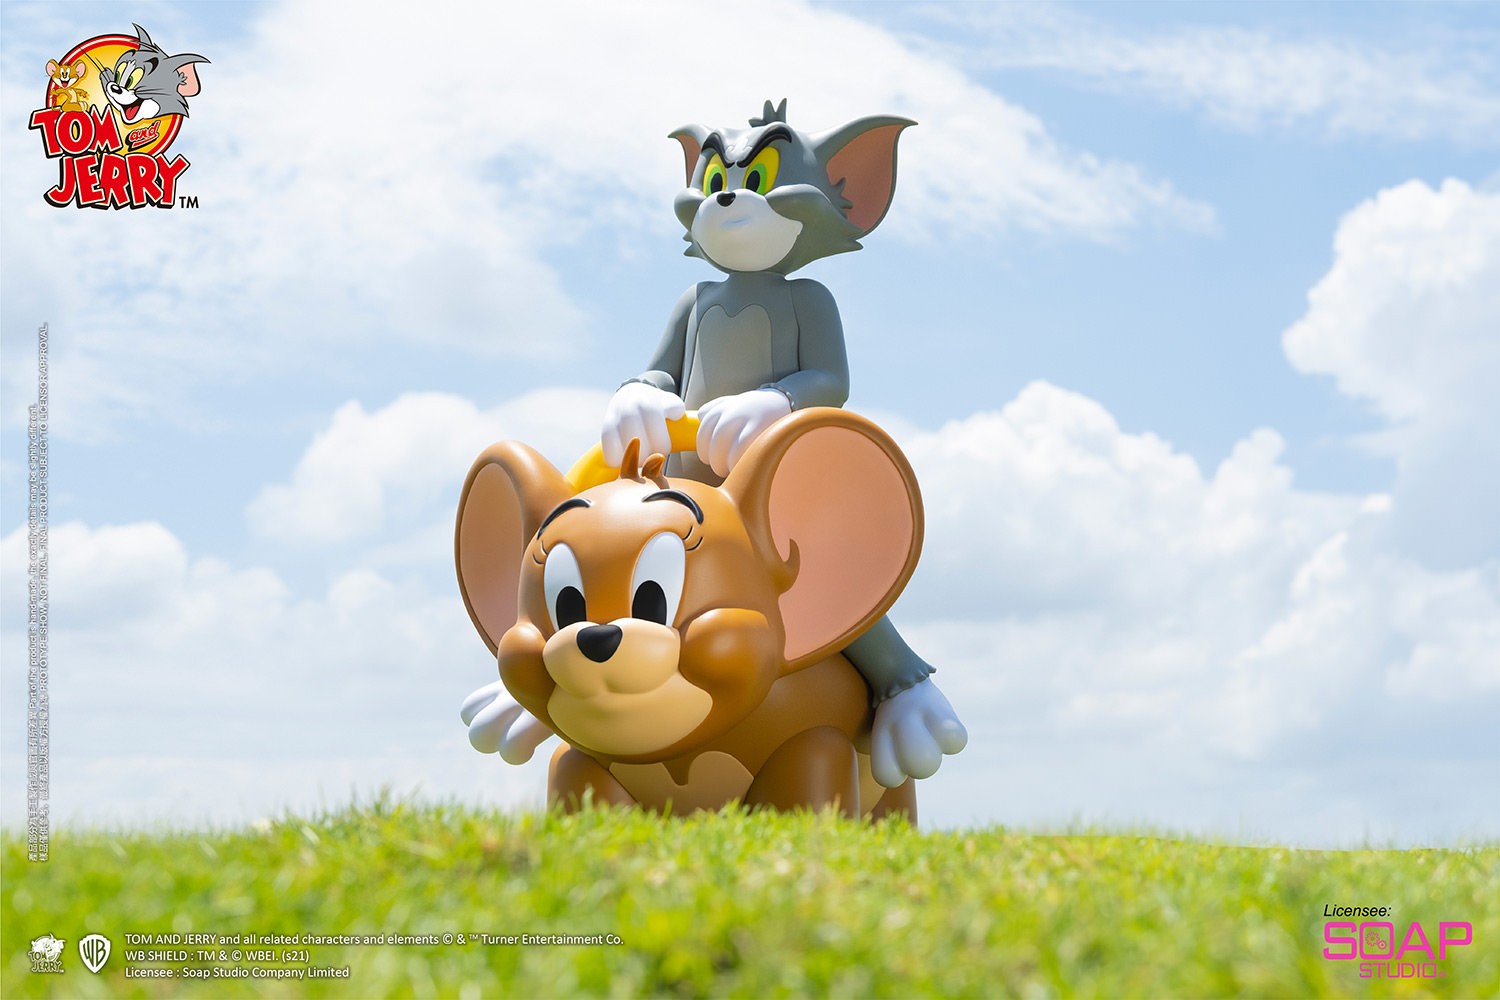 Tom and Jerry Mega Piggyback Ride (700% Version) (Prototype Shown) View 6